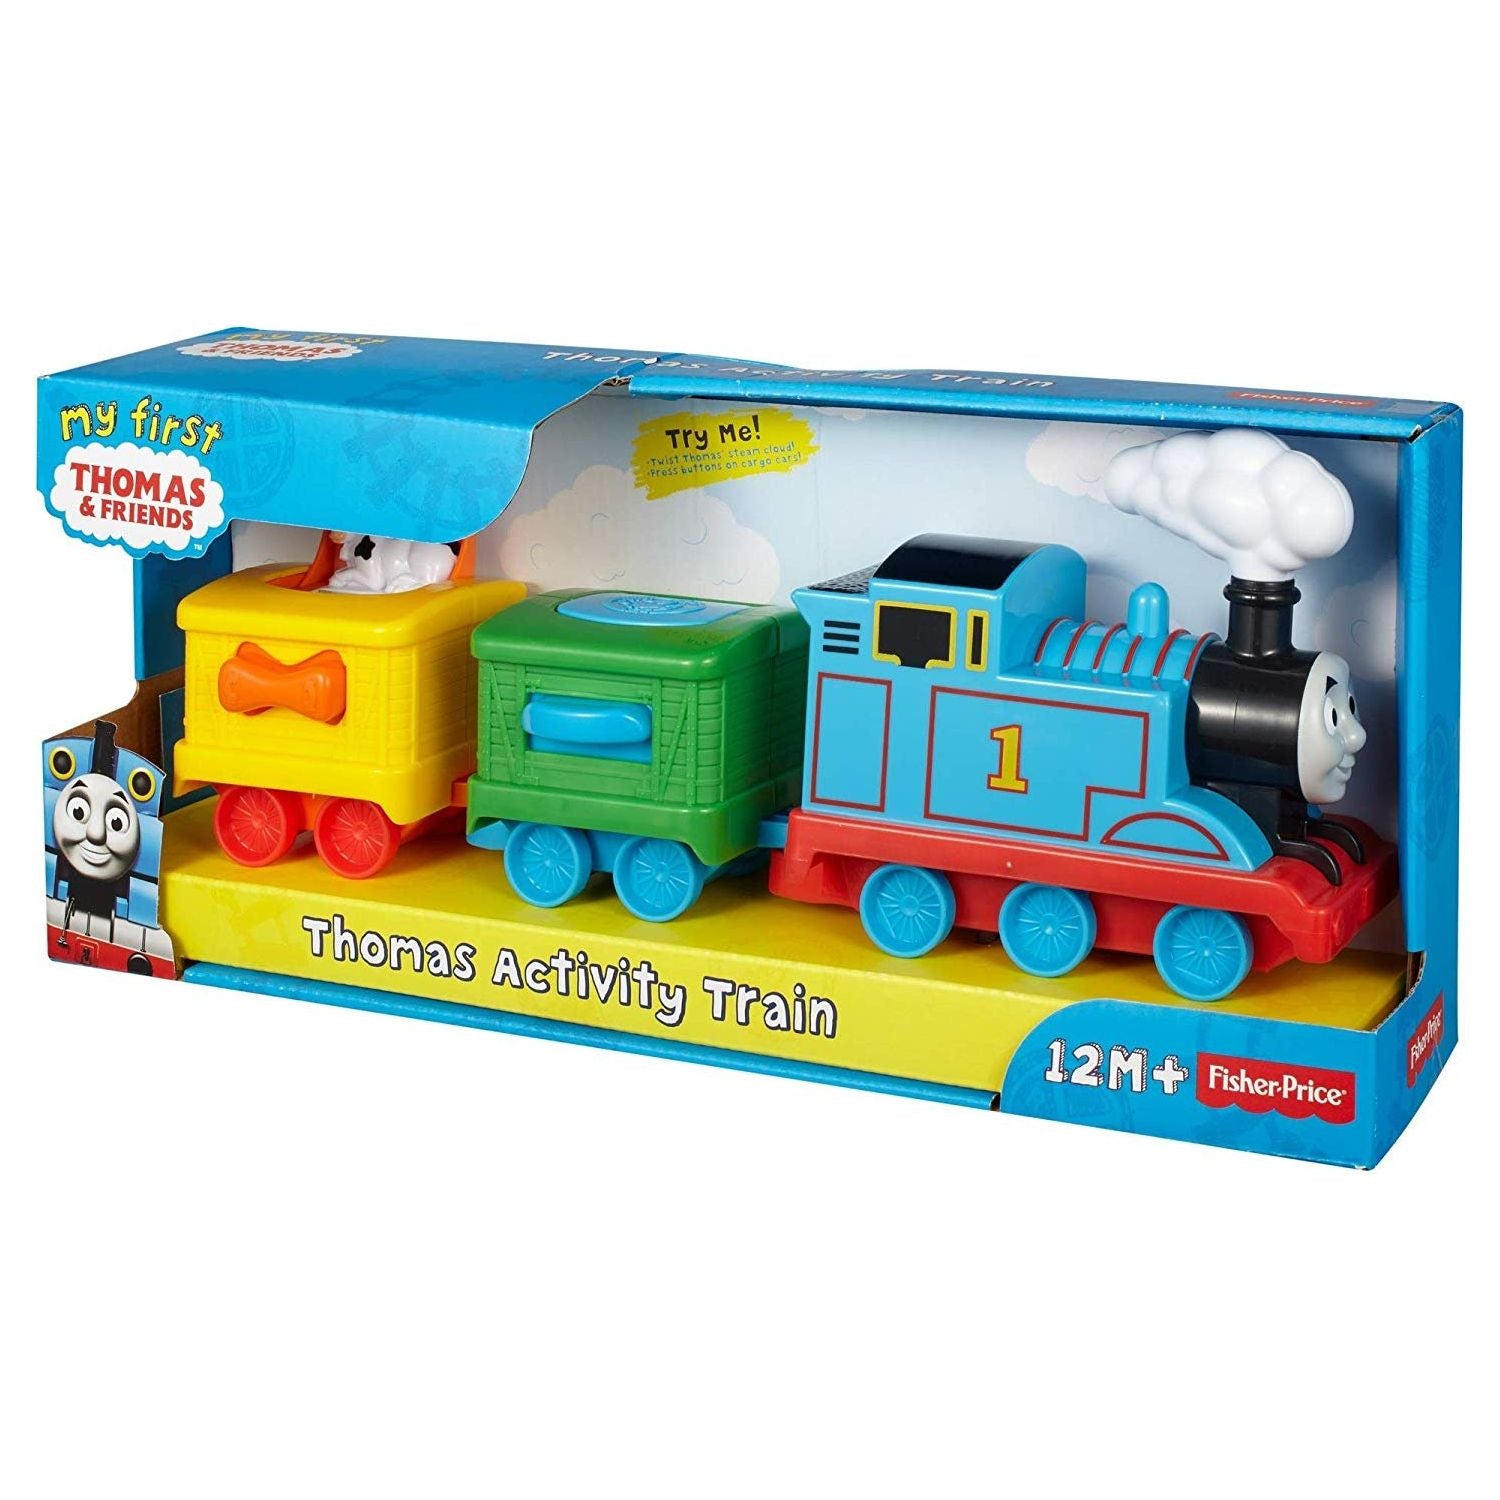 Fisher Price My First Thomas & Friends Activity Train